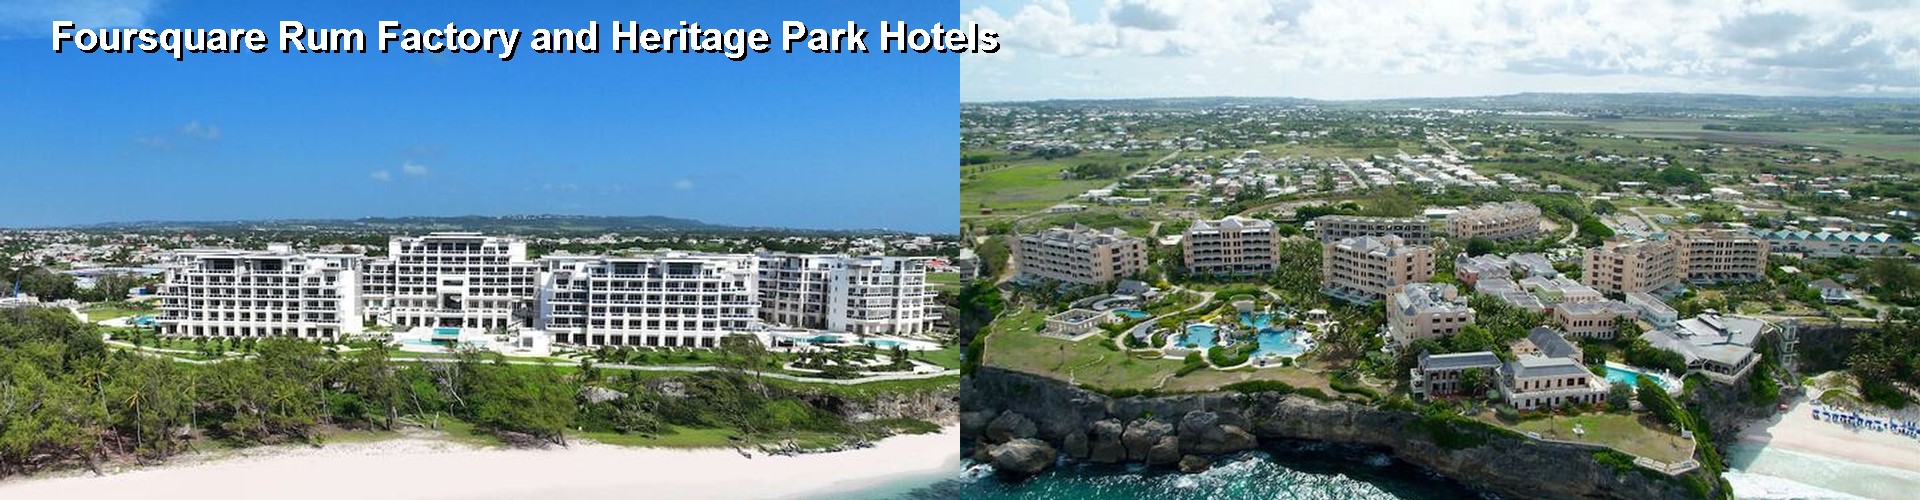 2 Best Hotels near Foursquare Rum Factory and Heritage Park